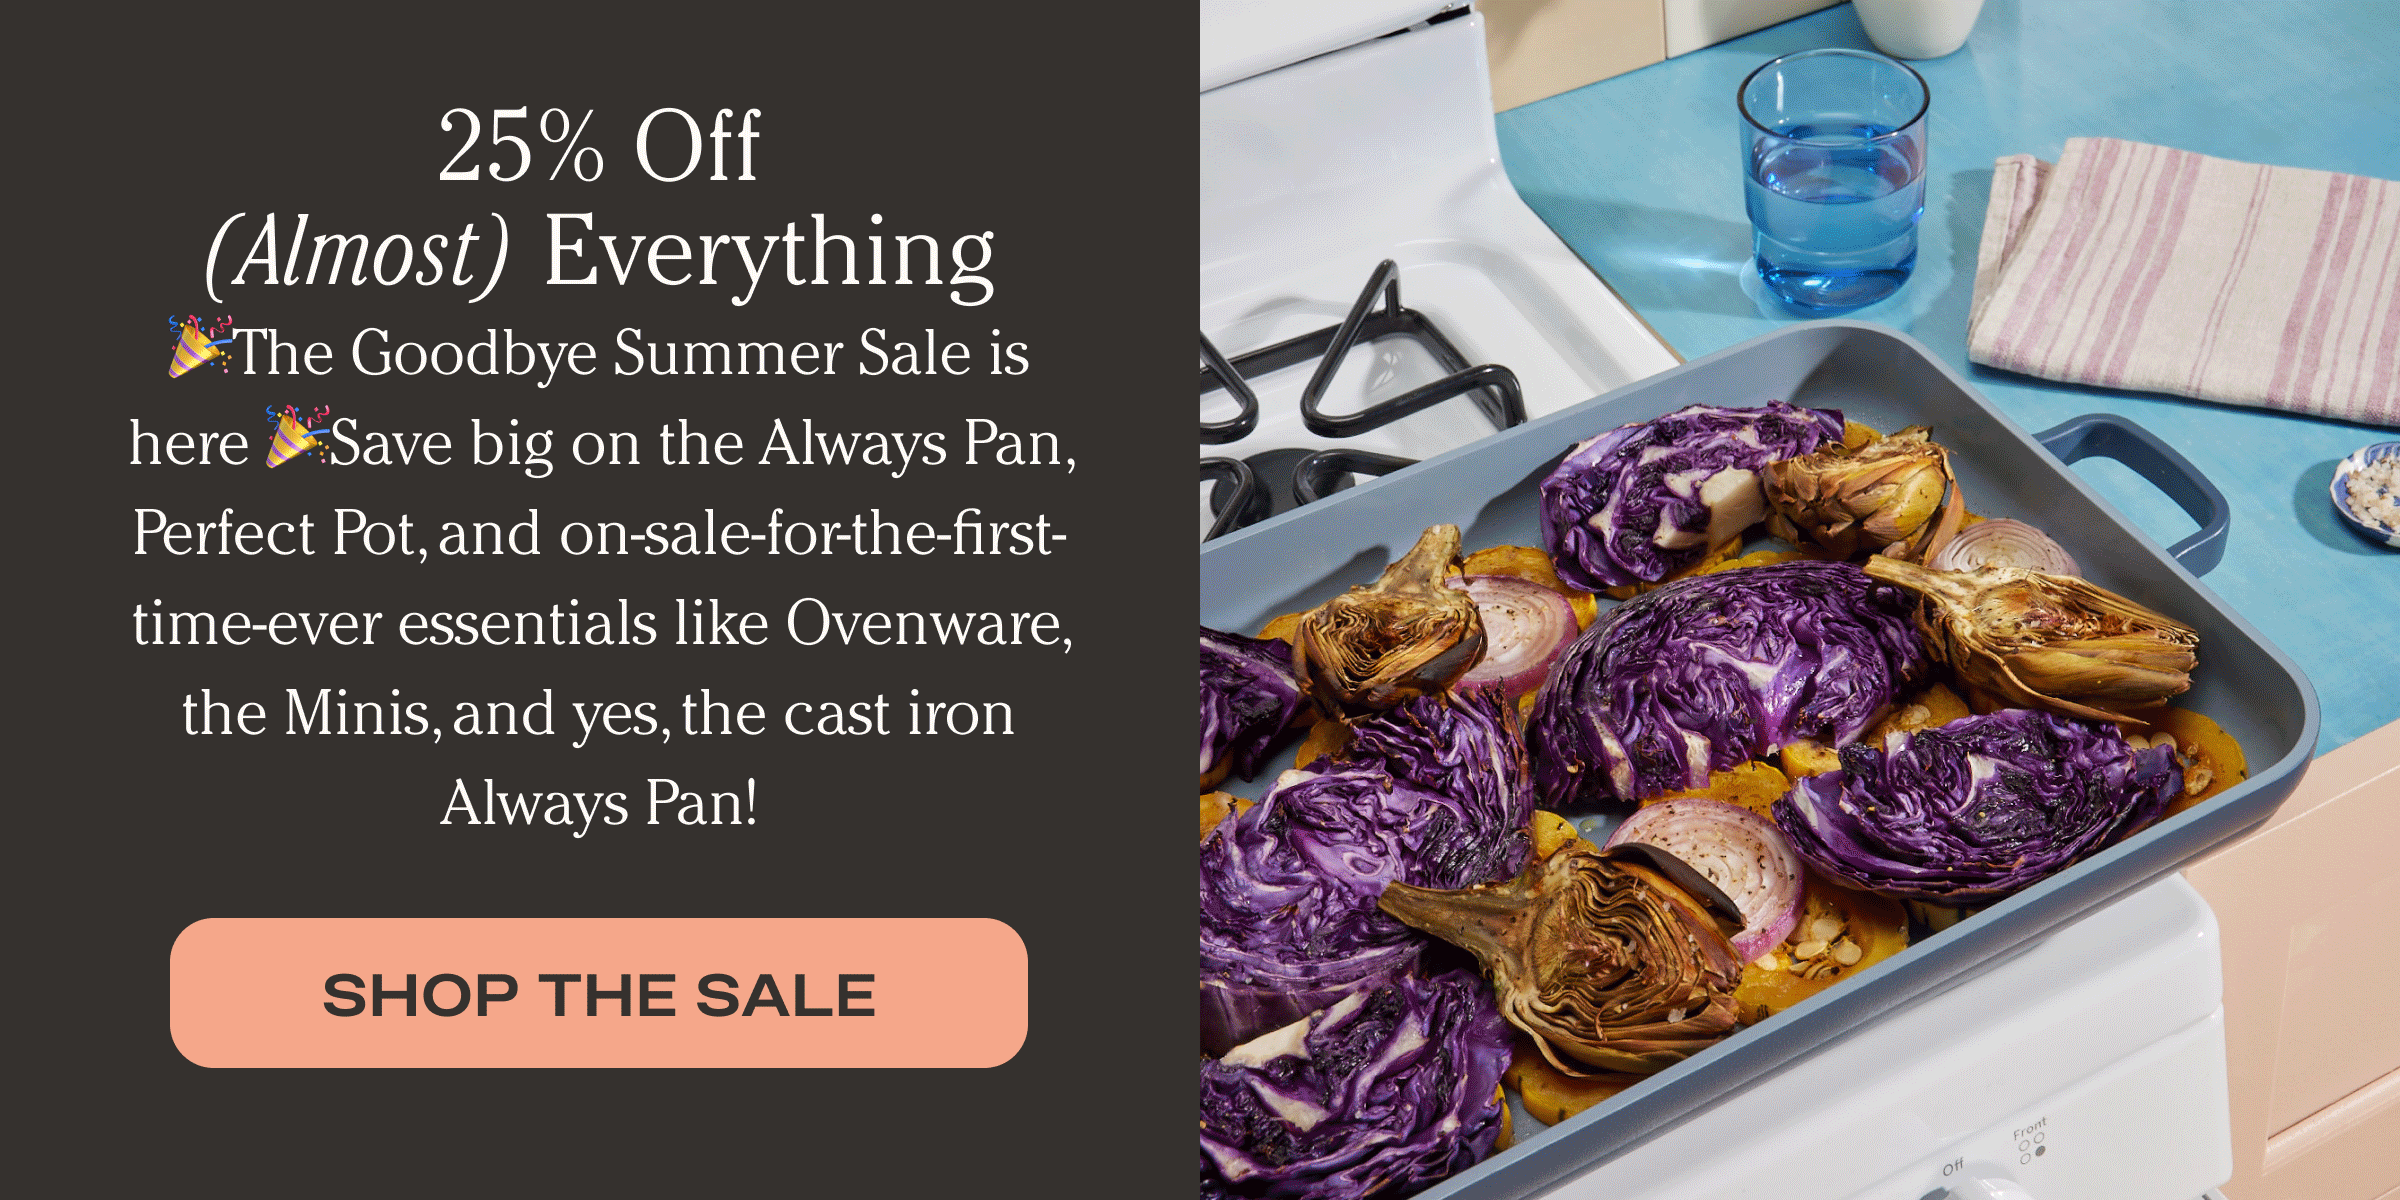 25% Off (Almost) Everything 🎉The Goodbye Summer Sale is here 🎉Save big on the Always Pan, Perfect Pot, and on-sale-for-the-first-time-ever essentials like Ovenware, the Minis, and yes, the cast iron Always Pan! - Shop the sale